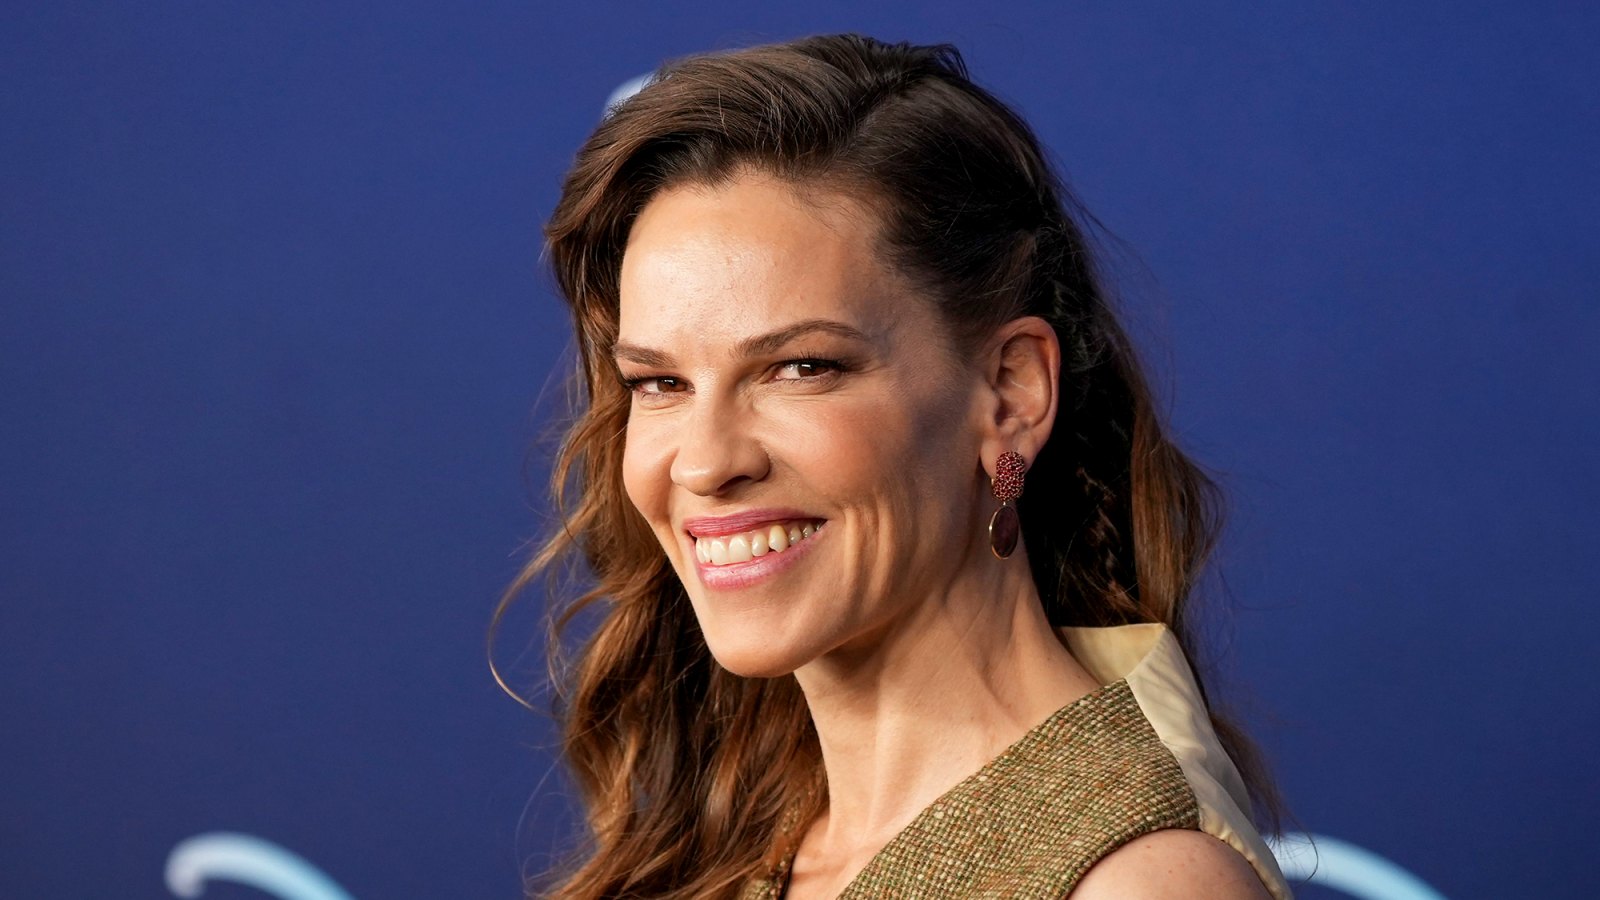 Hilary-Swank-Has-Been-Transformed-by-Motherhood-After-Welcoming-Twins-Ecstatic-But-Exhausted.jpg?crop=0px%2C0px%2C2000px%2C1131px&resize=1600%2C900&quality=86&strip=all